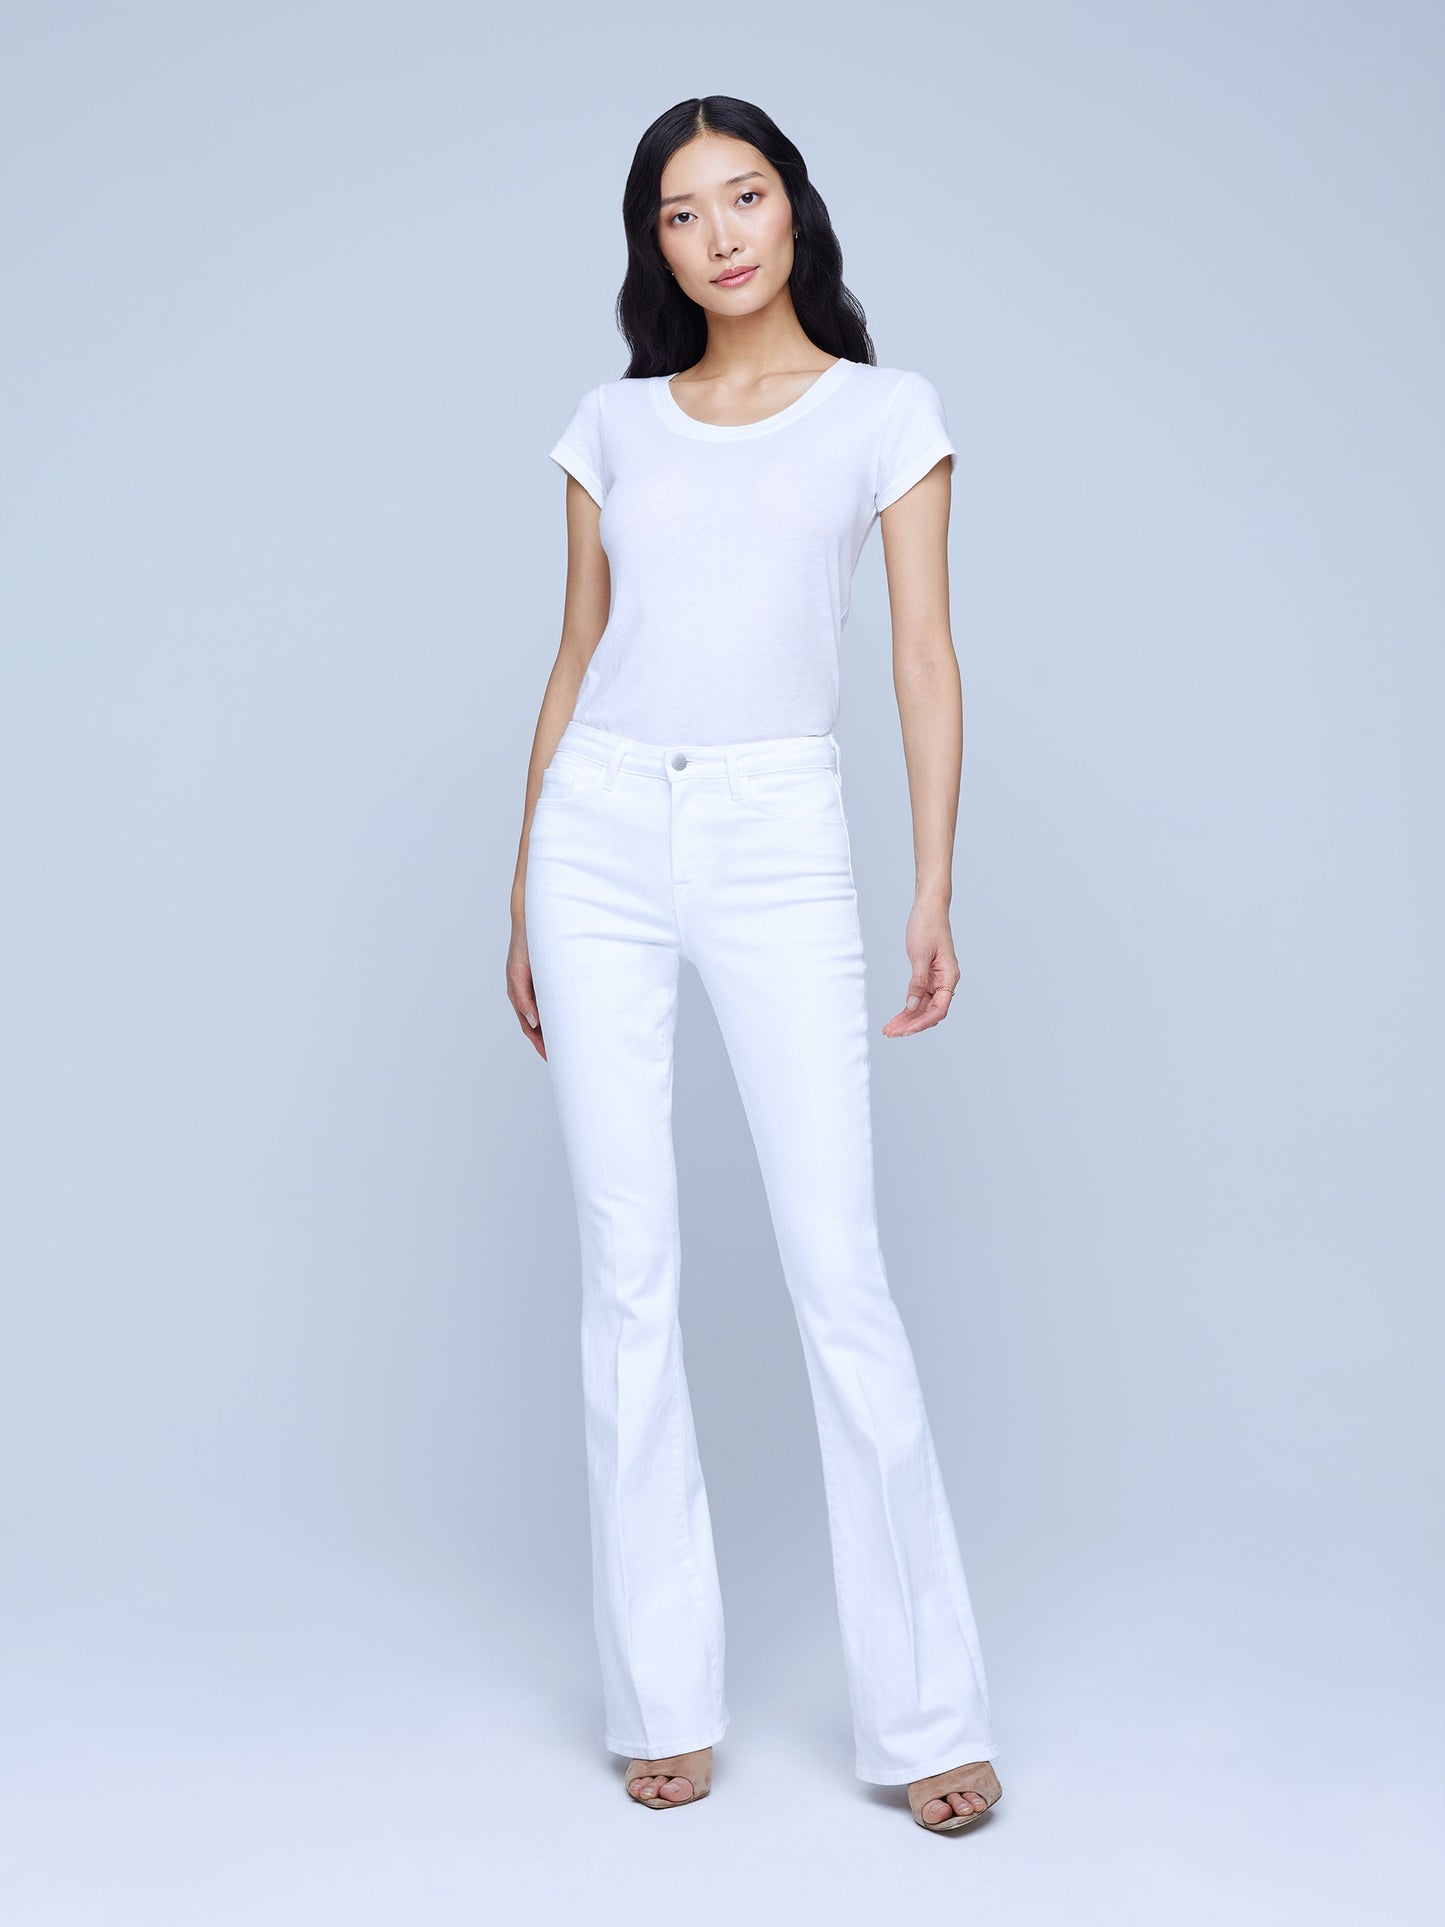 Lagence Bell High Rise Flare Jeans